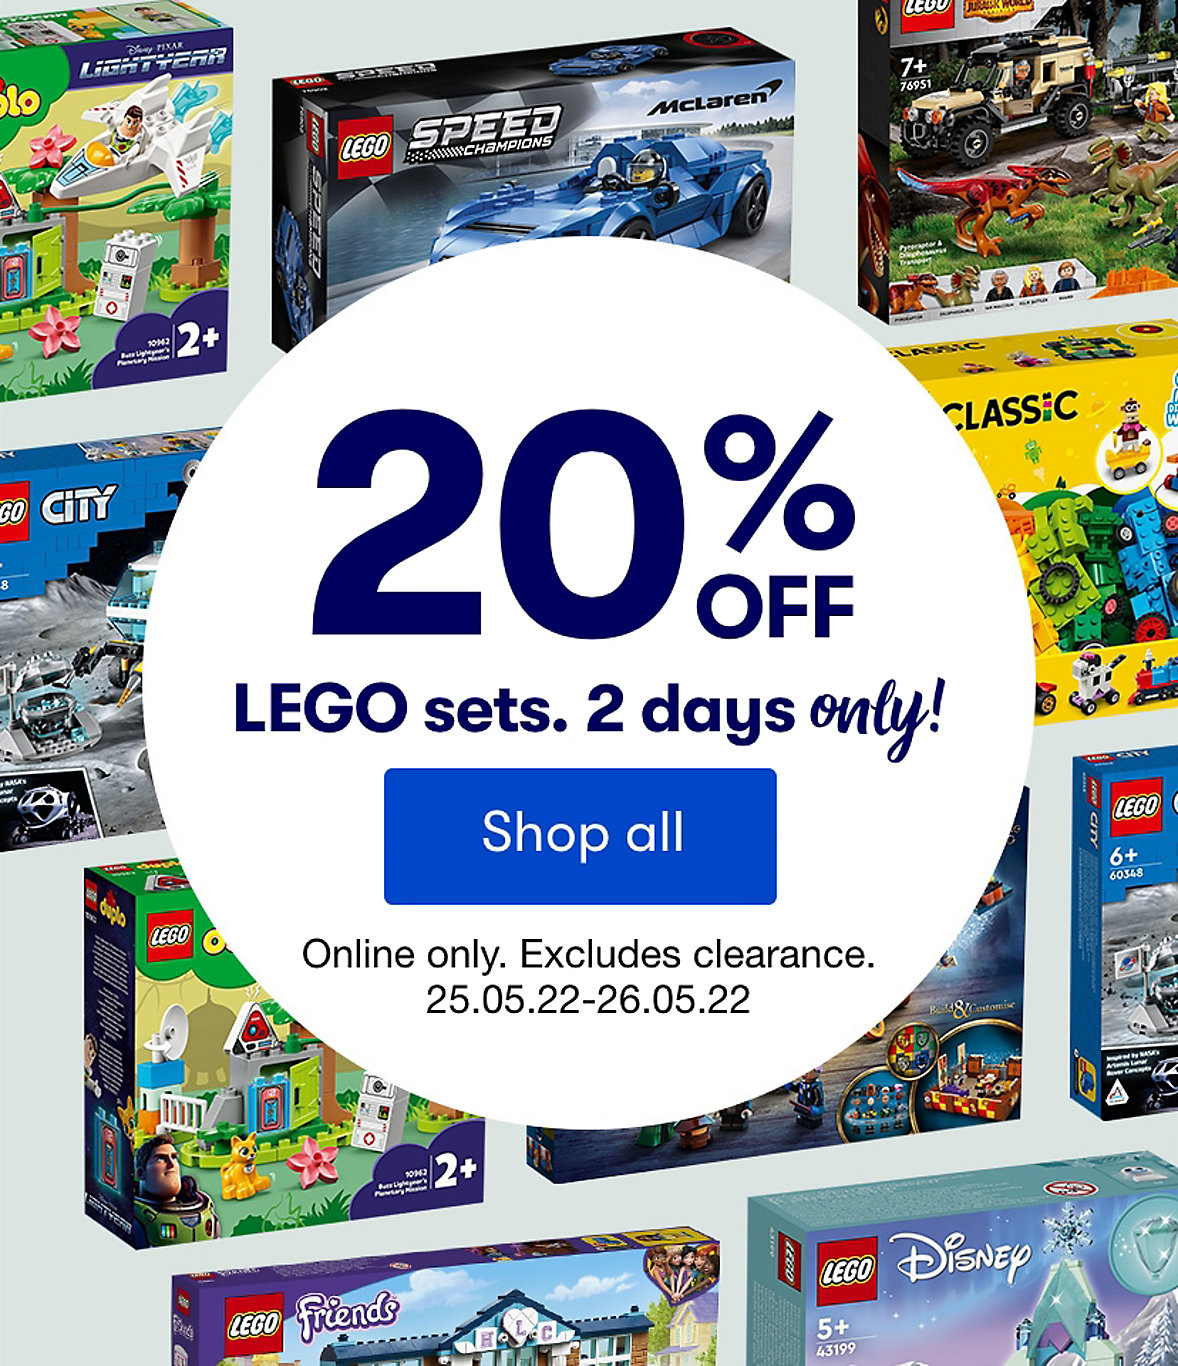 Save 20% on LEGO sets for 2 days only.